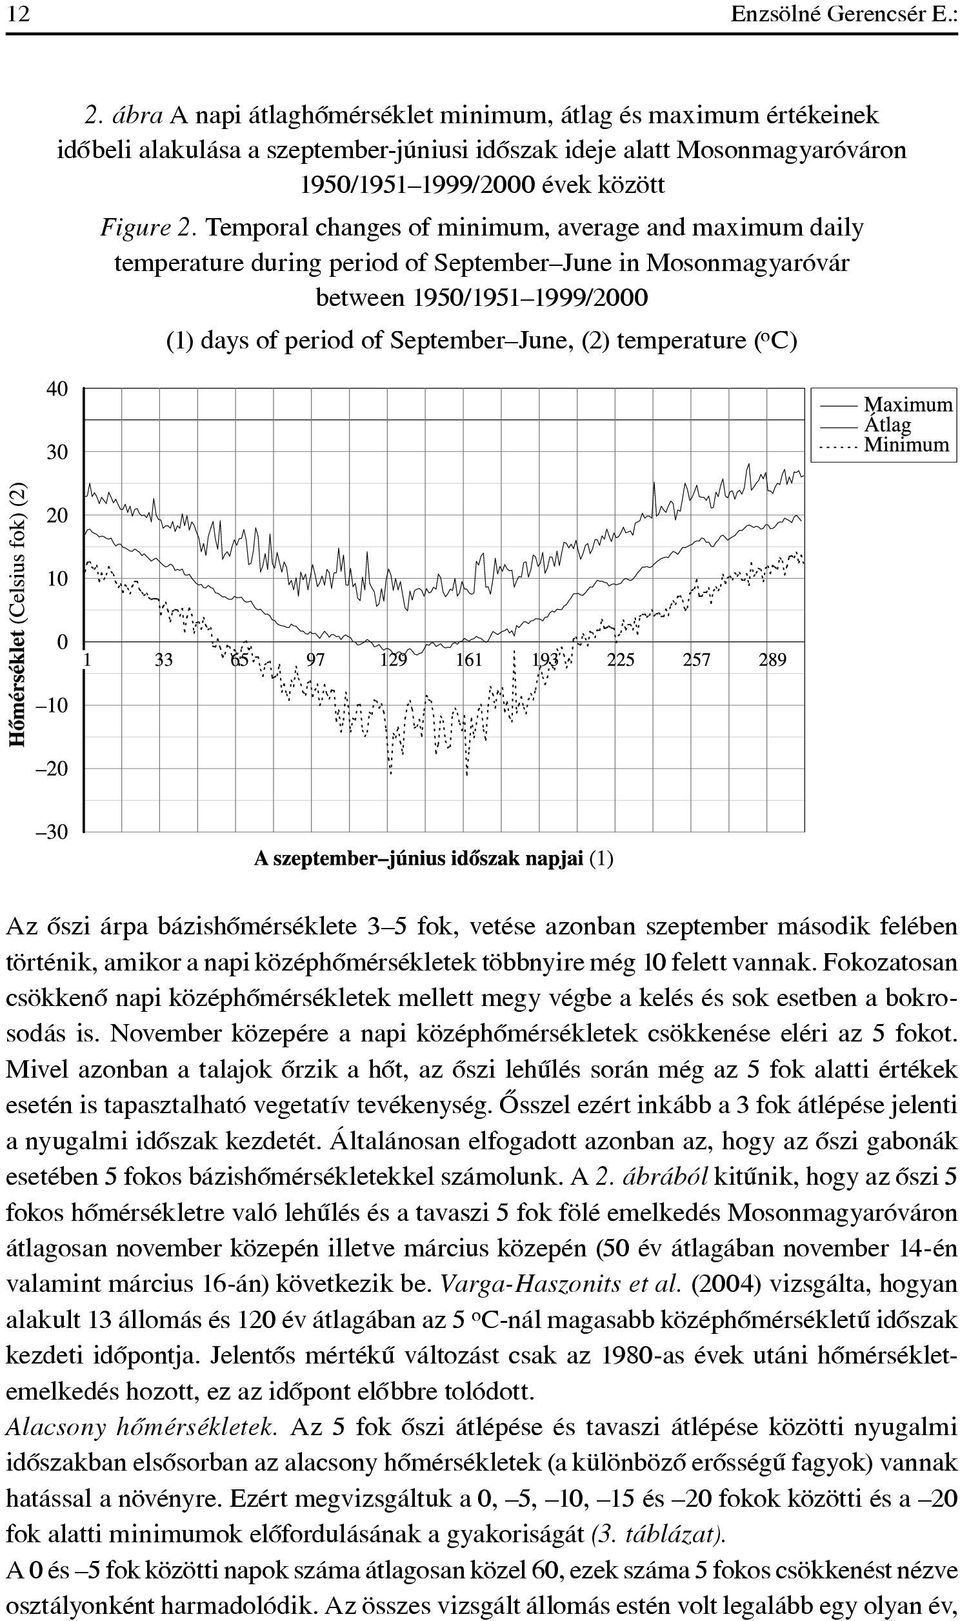 Temporal changes of minimum, average and maximum daily temperature during period of September June in Mosonmagyaróvár between 1950/1951 1999/2000 (1) days of period of September June, (2) temperature